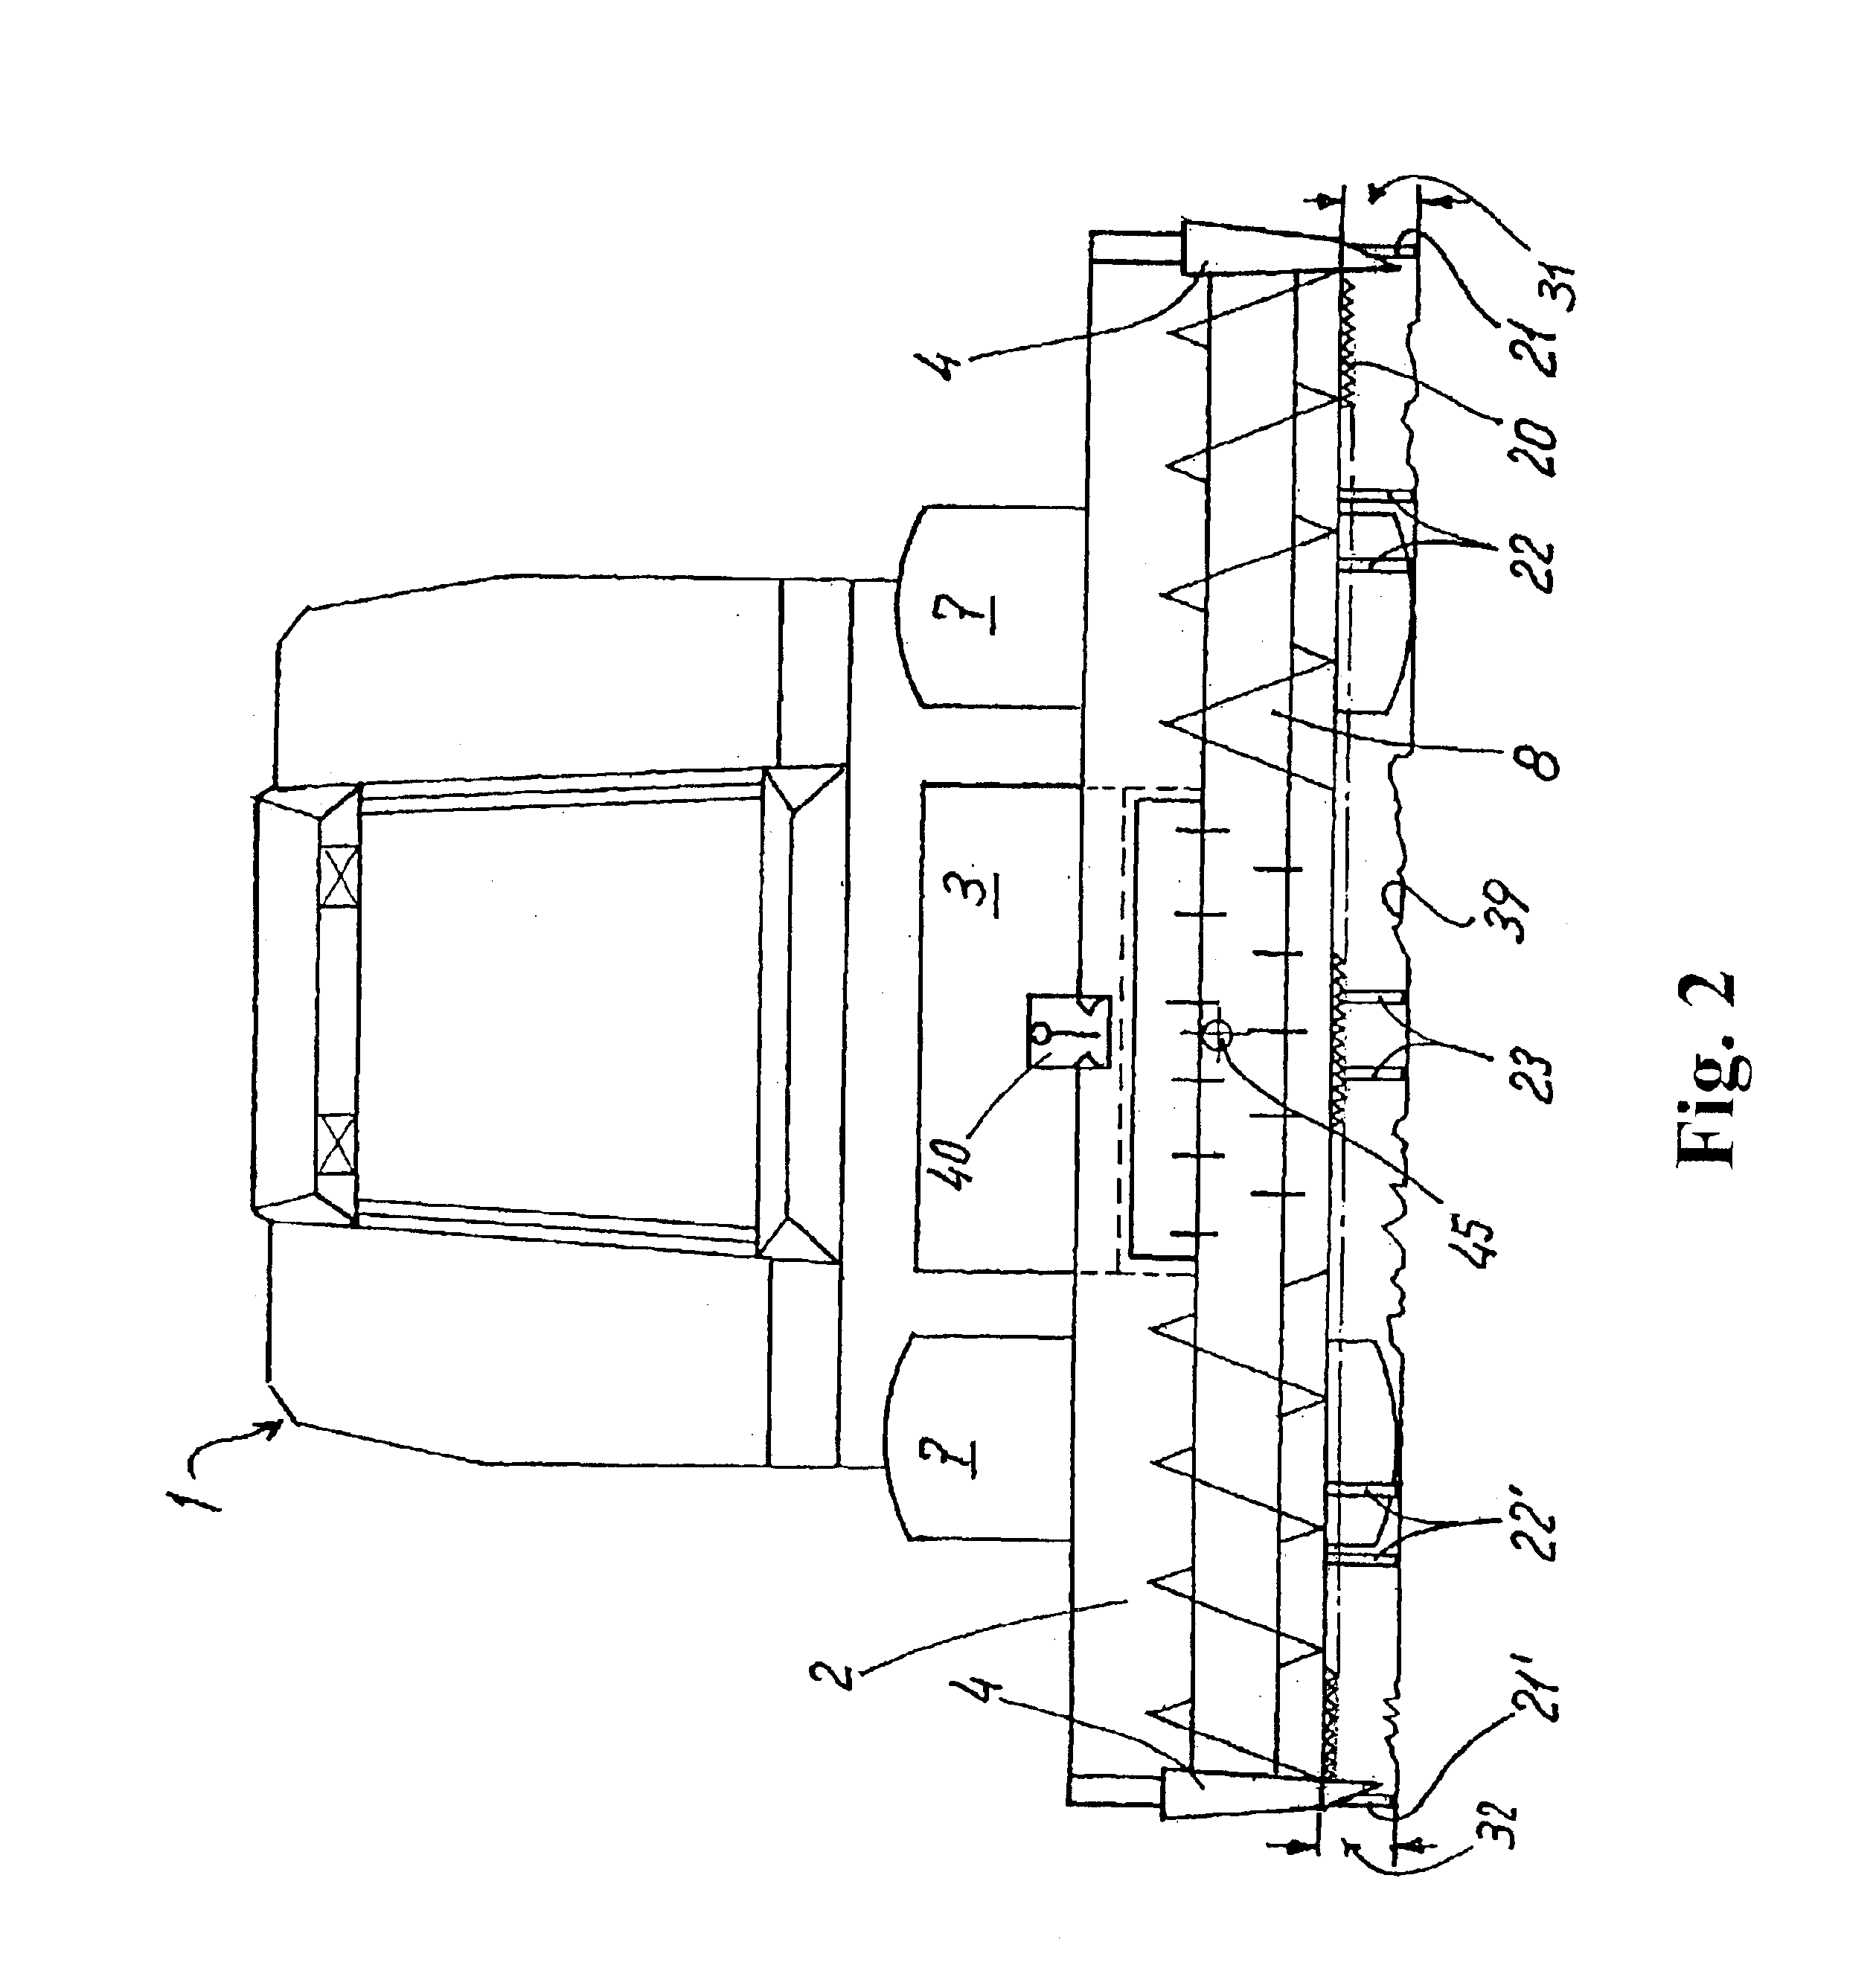 Position control for a crop pickup device